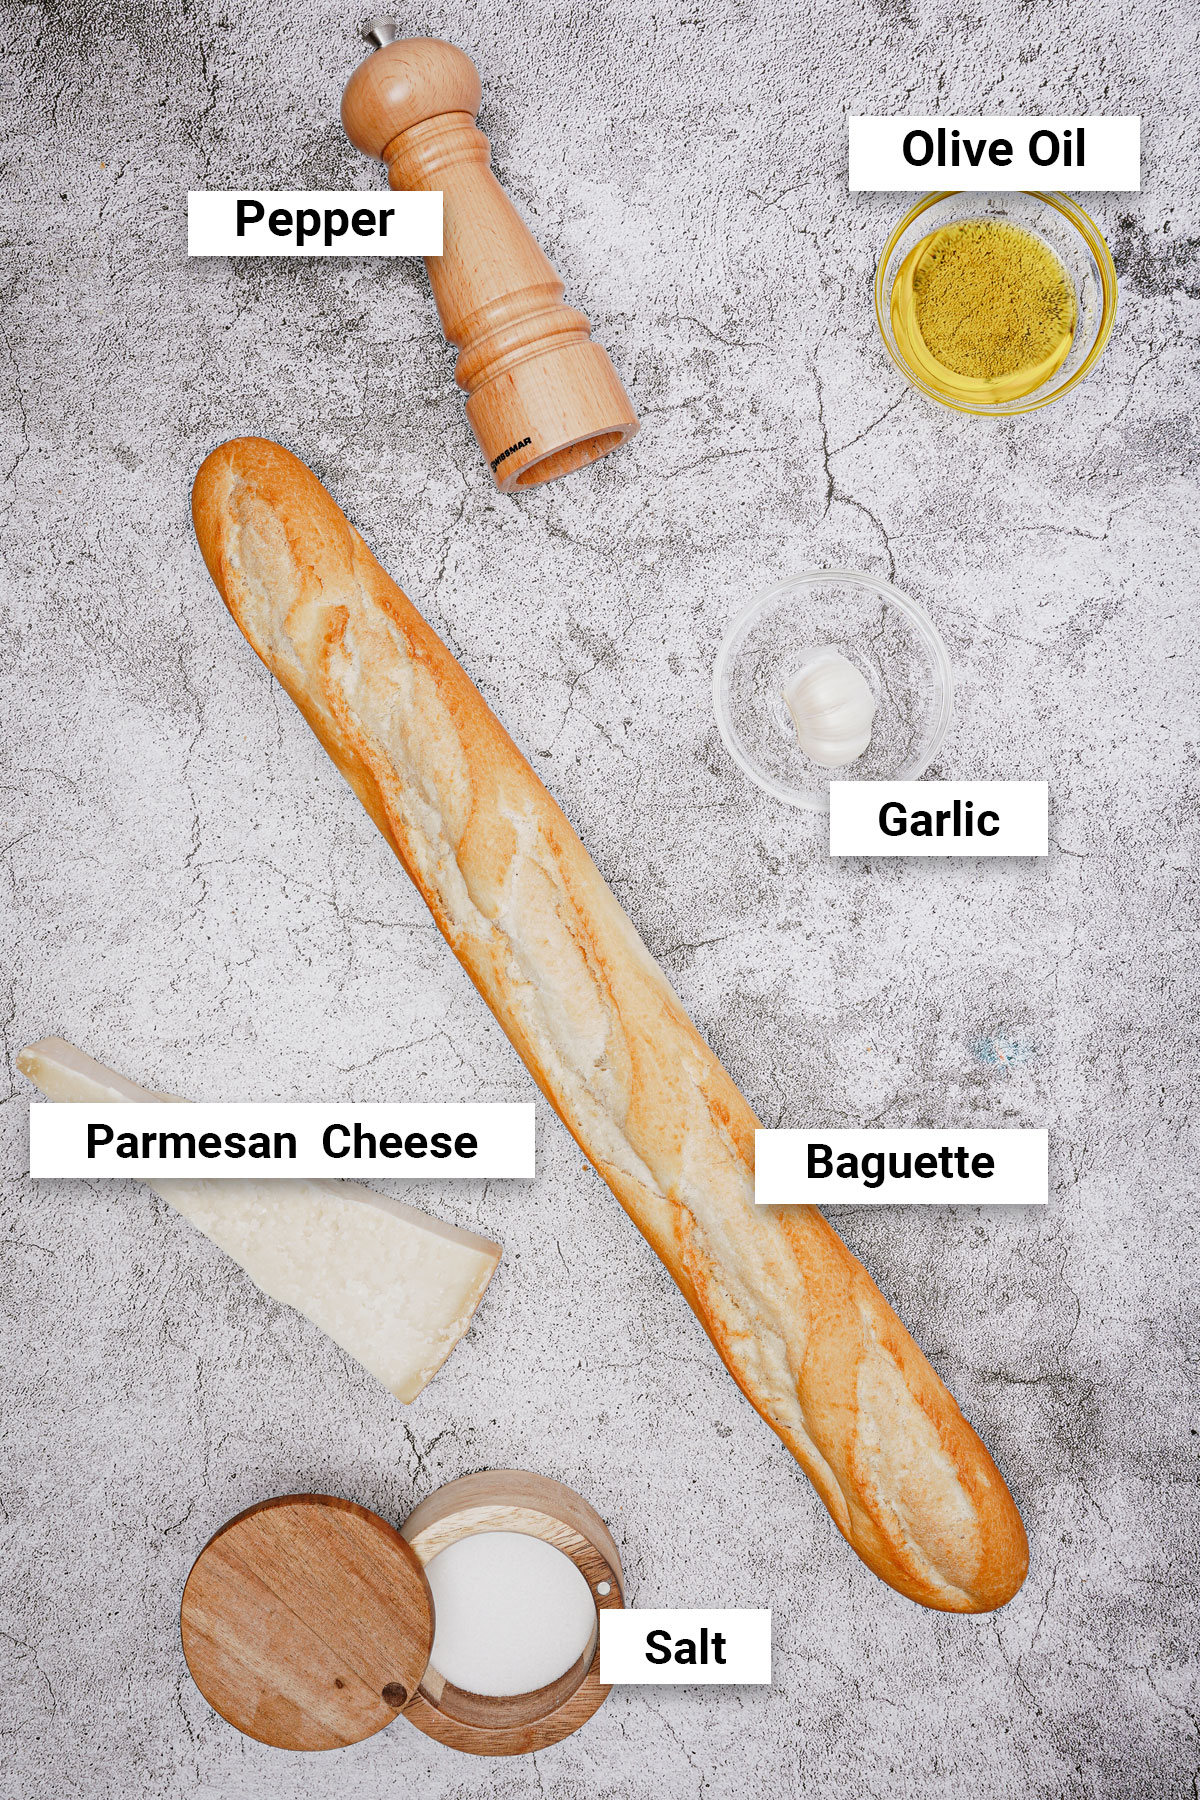 Ingredients for air fryer croutons with parmesan cheese.